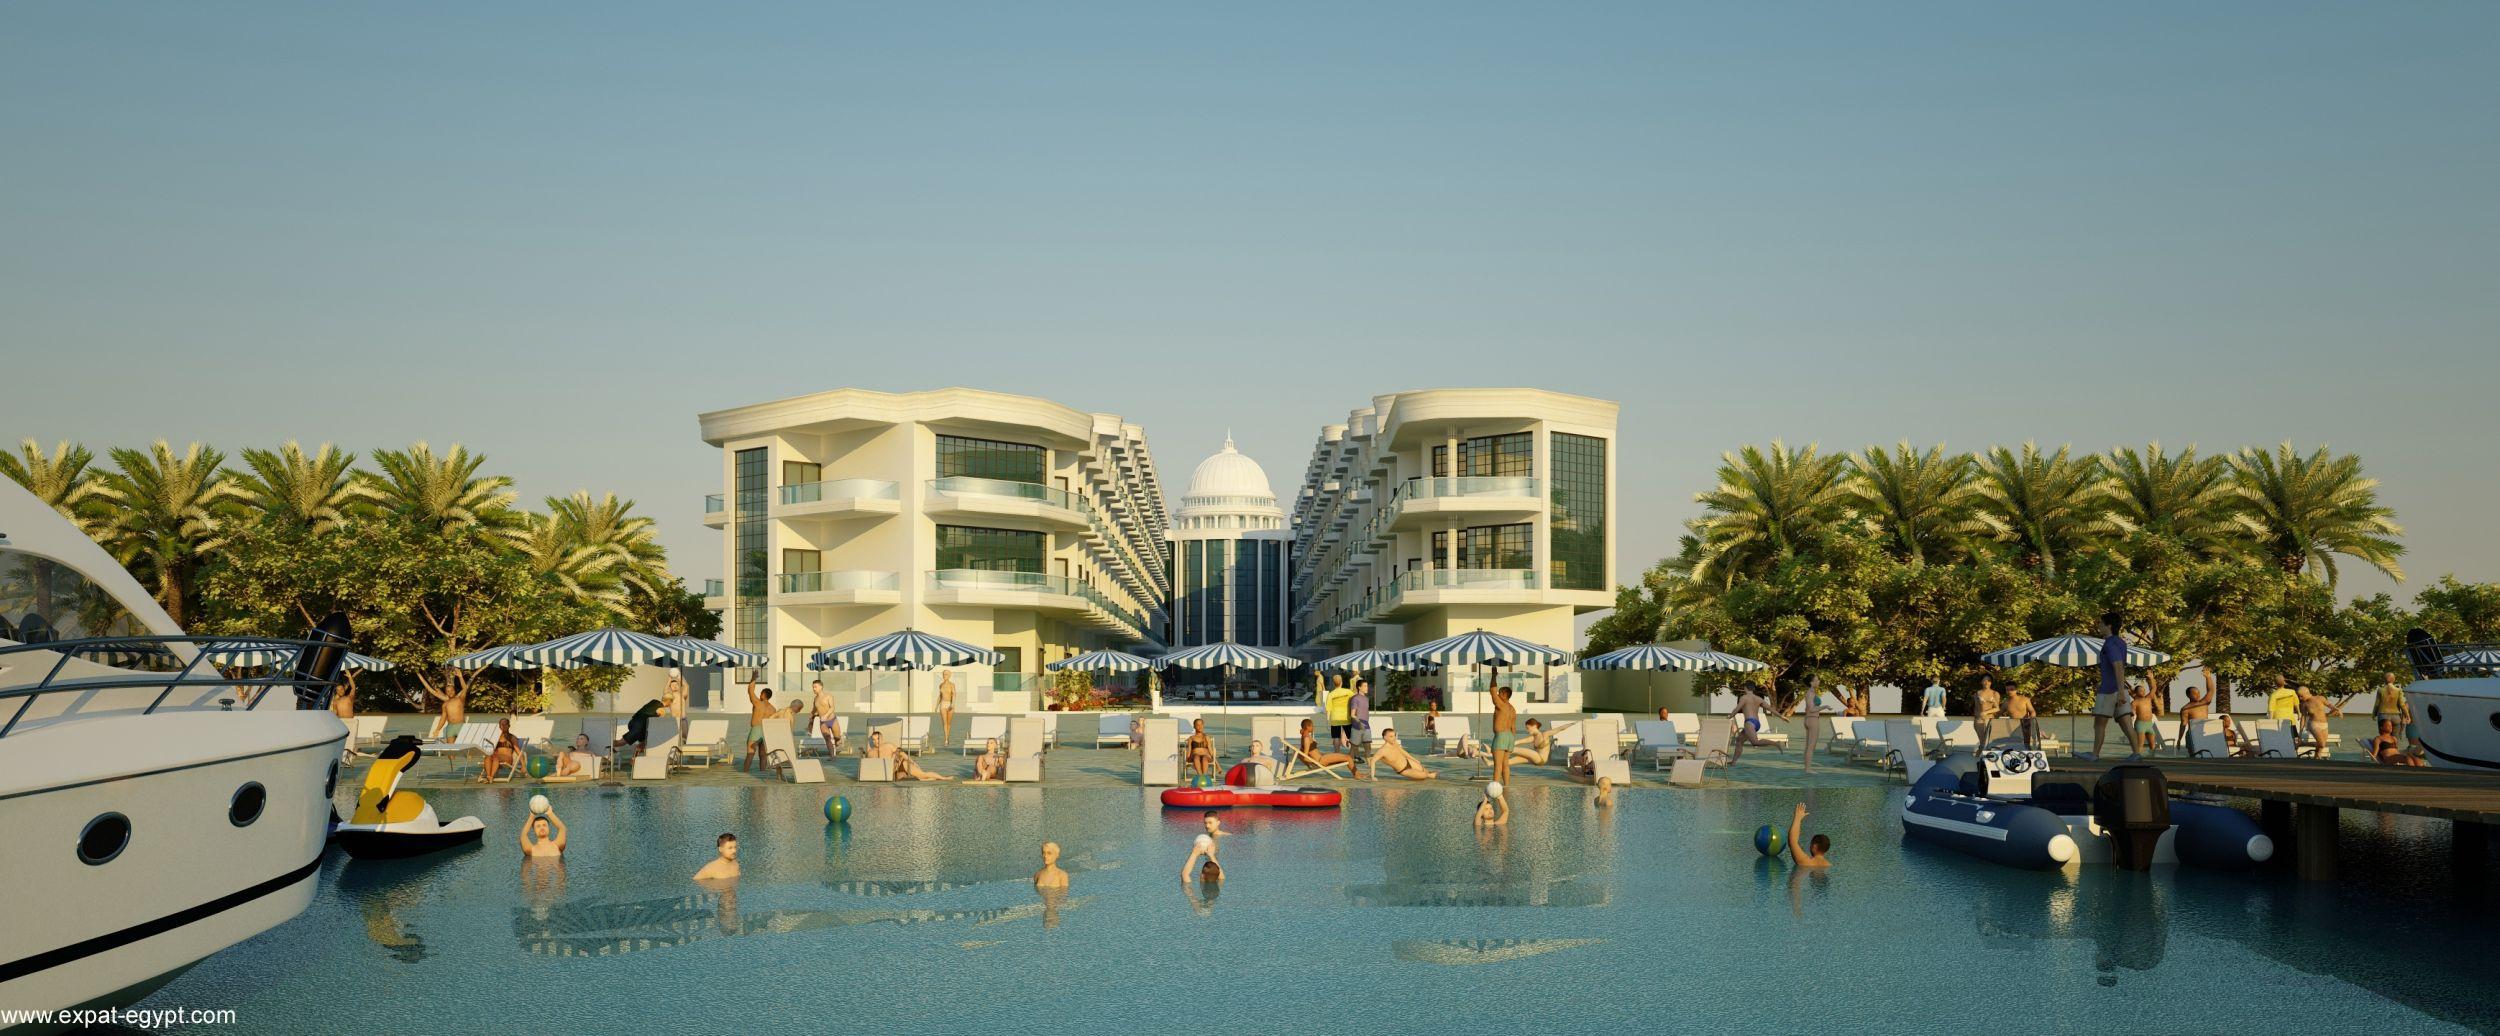 Apartment for Sale Directly on the beach in the centre of Hurghada 41000$. Непосредственно на пляже 